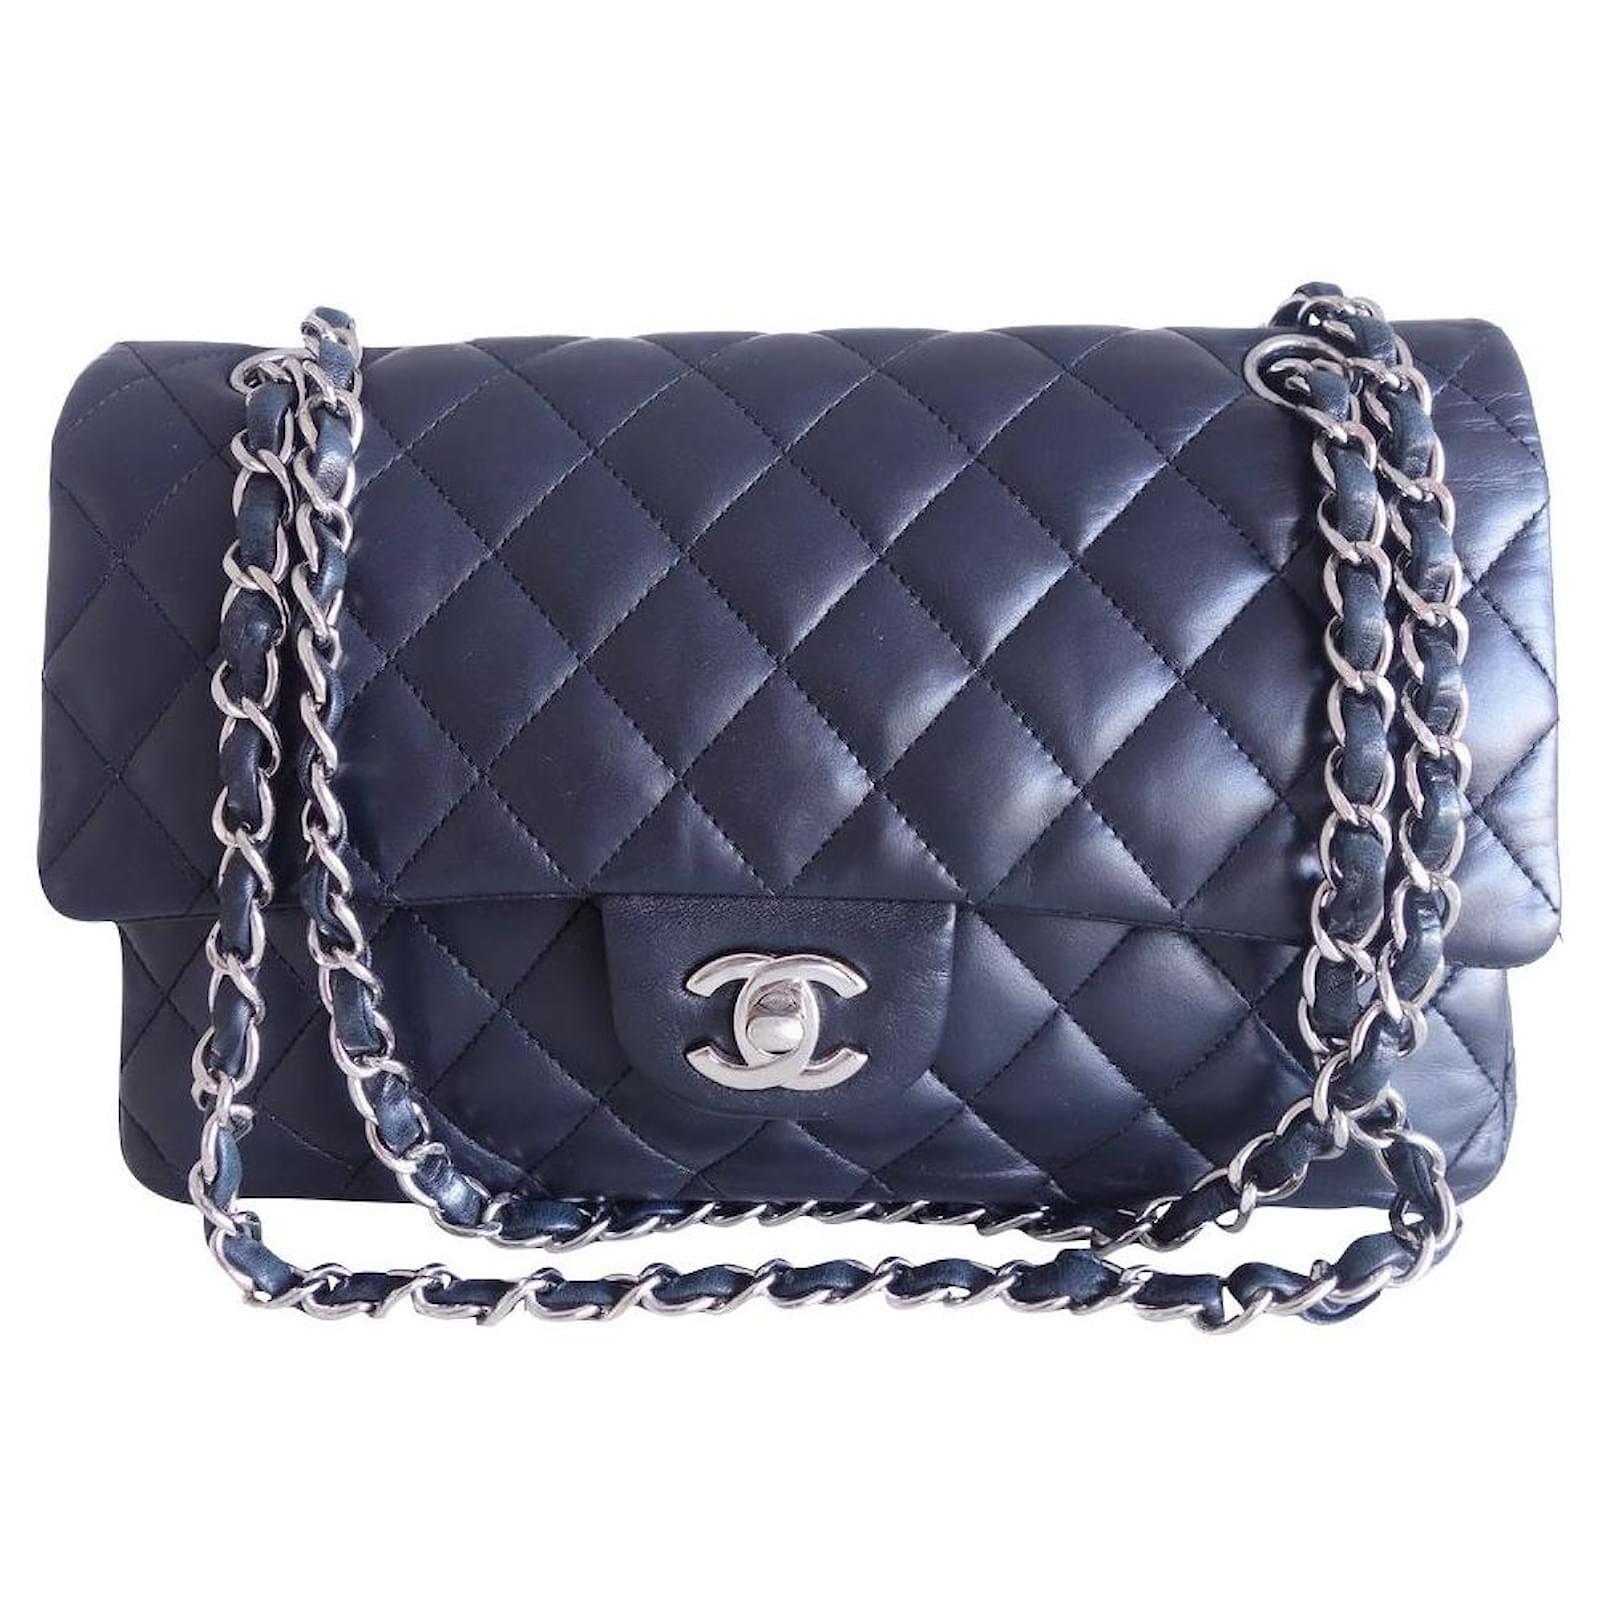 Blue Quilted Lambskin Classic Double Flap Medium